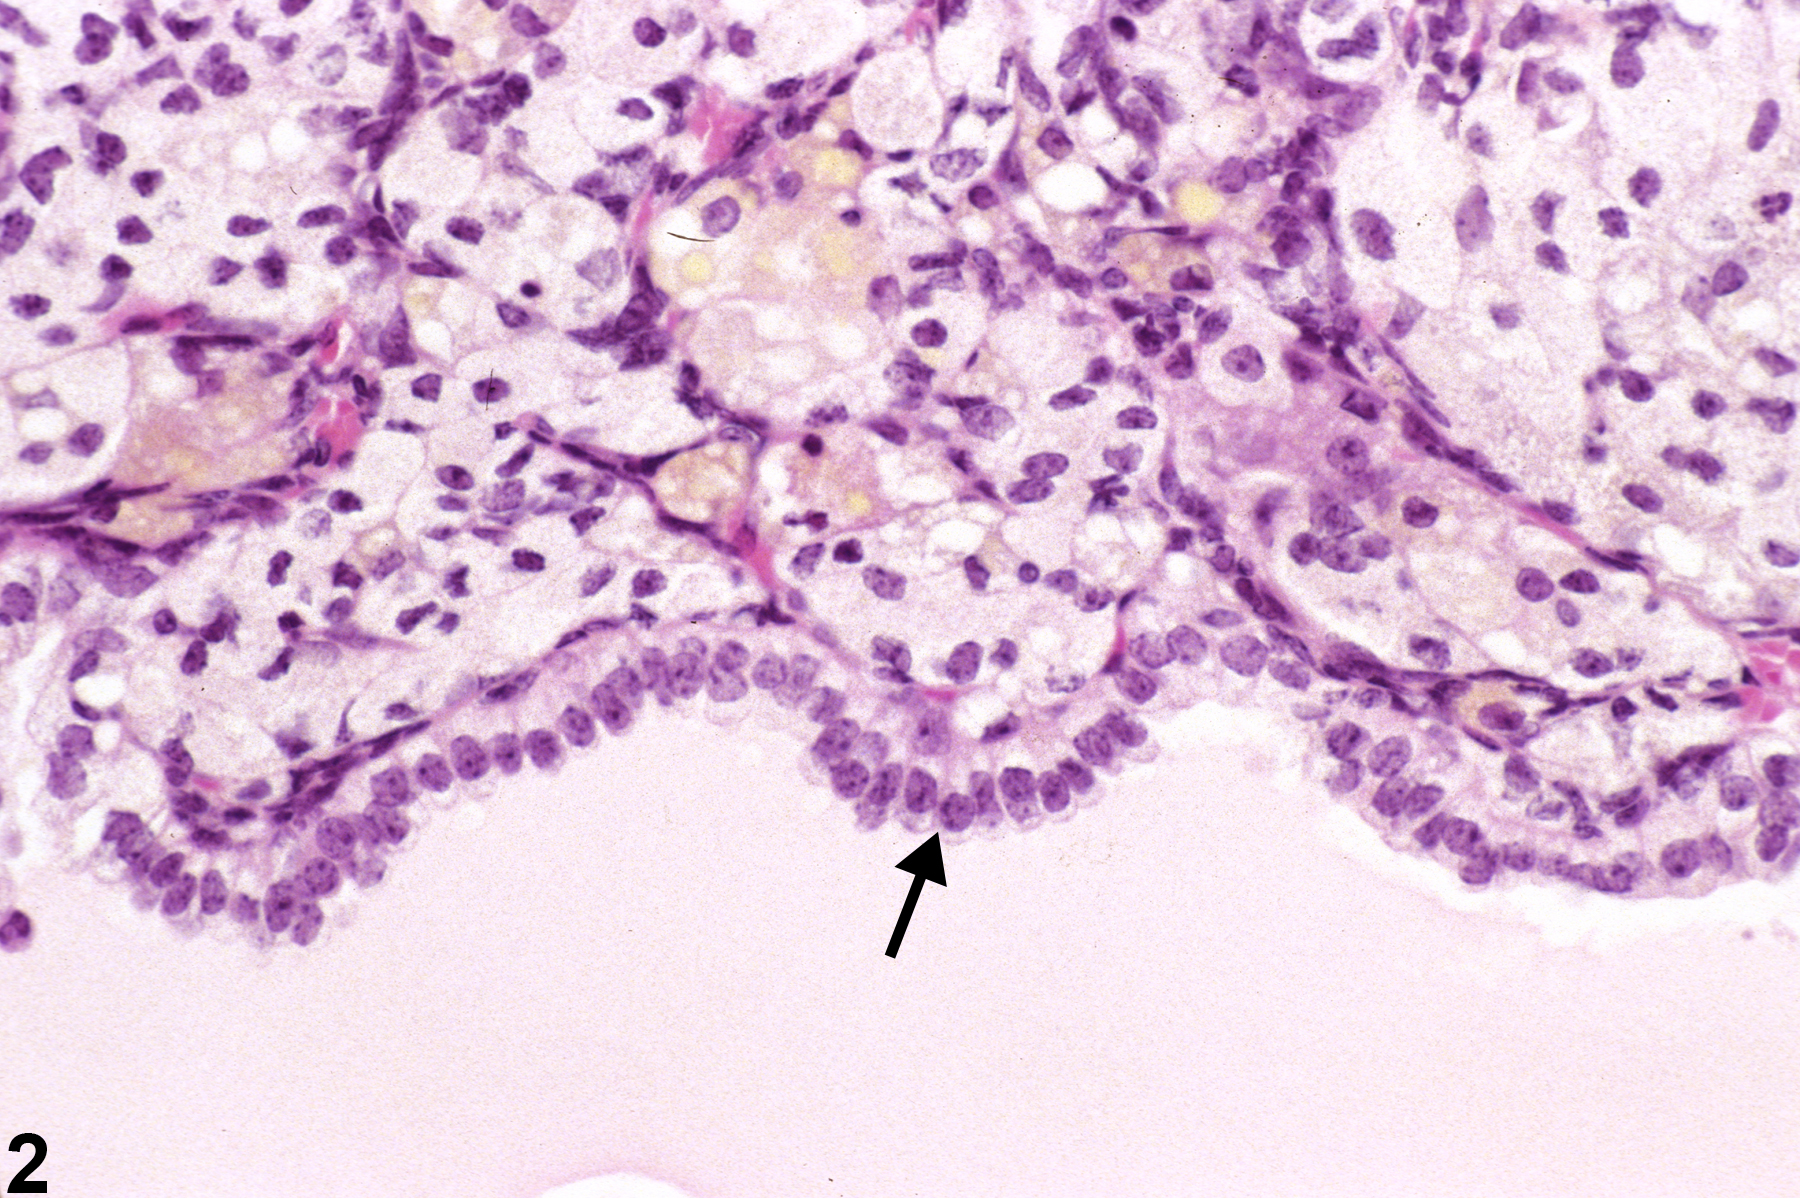 Image of cyst in the adrenal gland from a female B6C3F1/N mouse in a chronic study